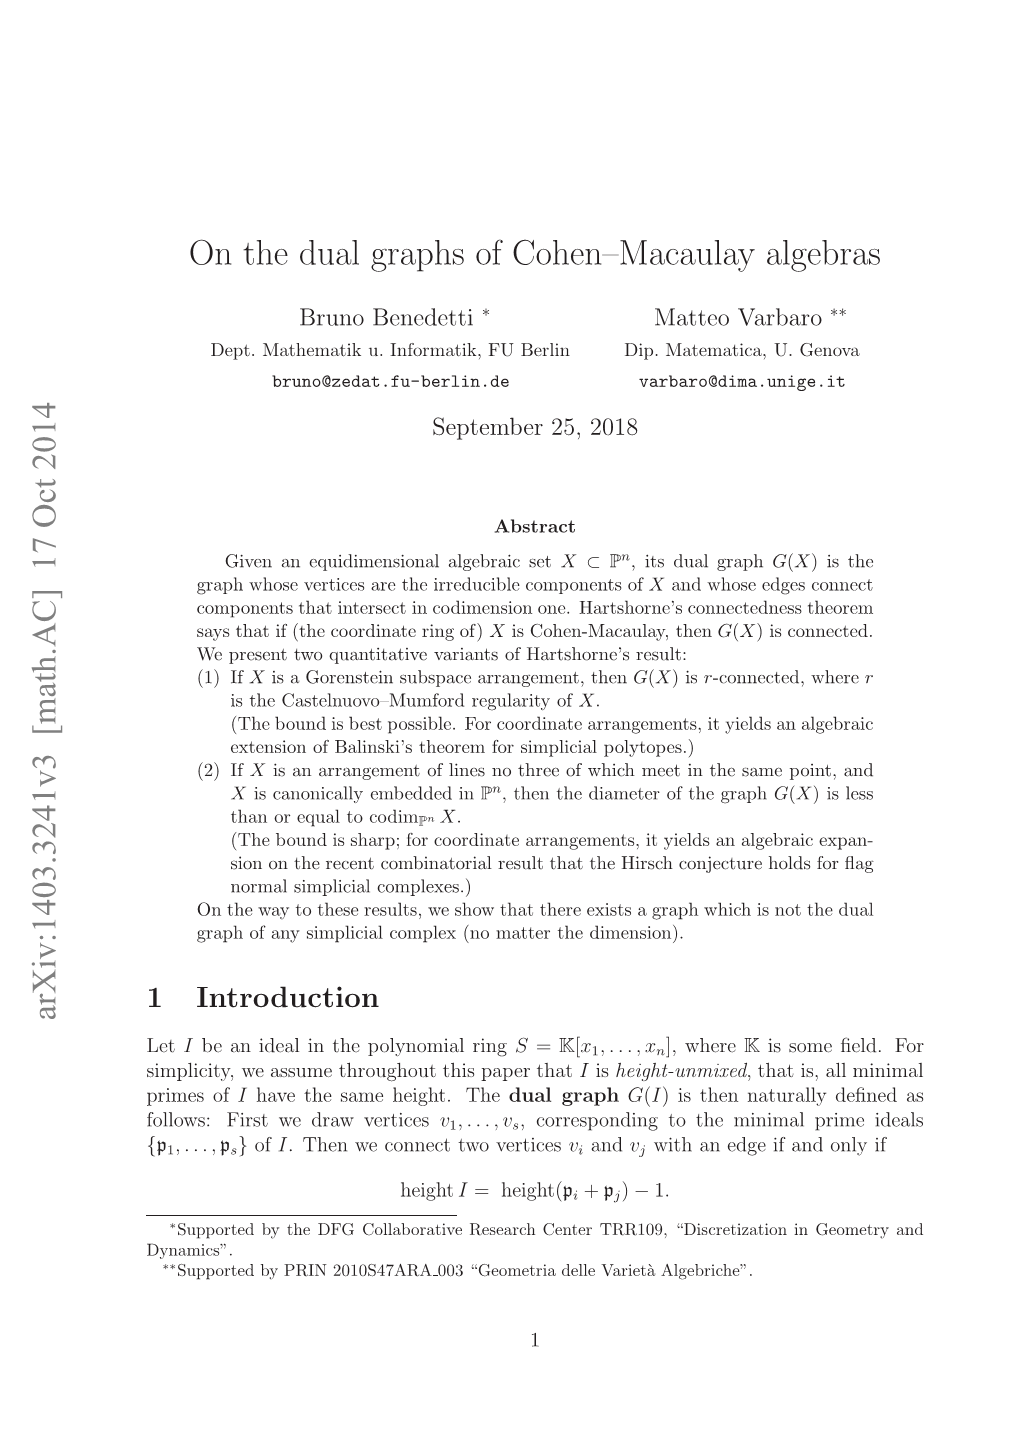 On the Dual Graph of Cohen-Macaulay Algebras